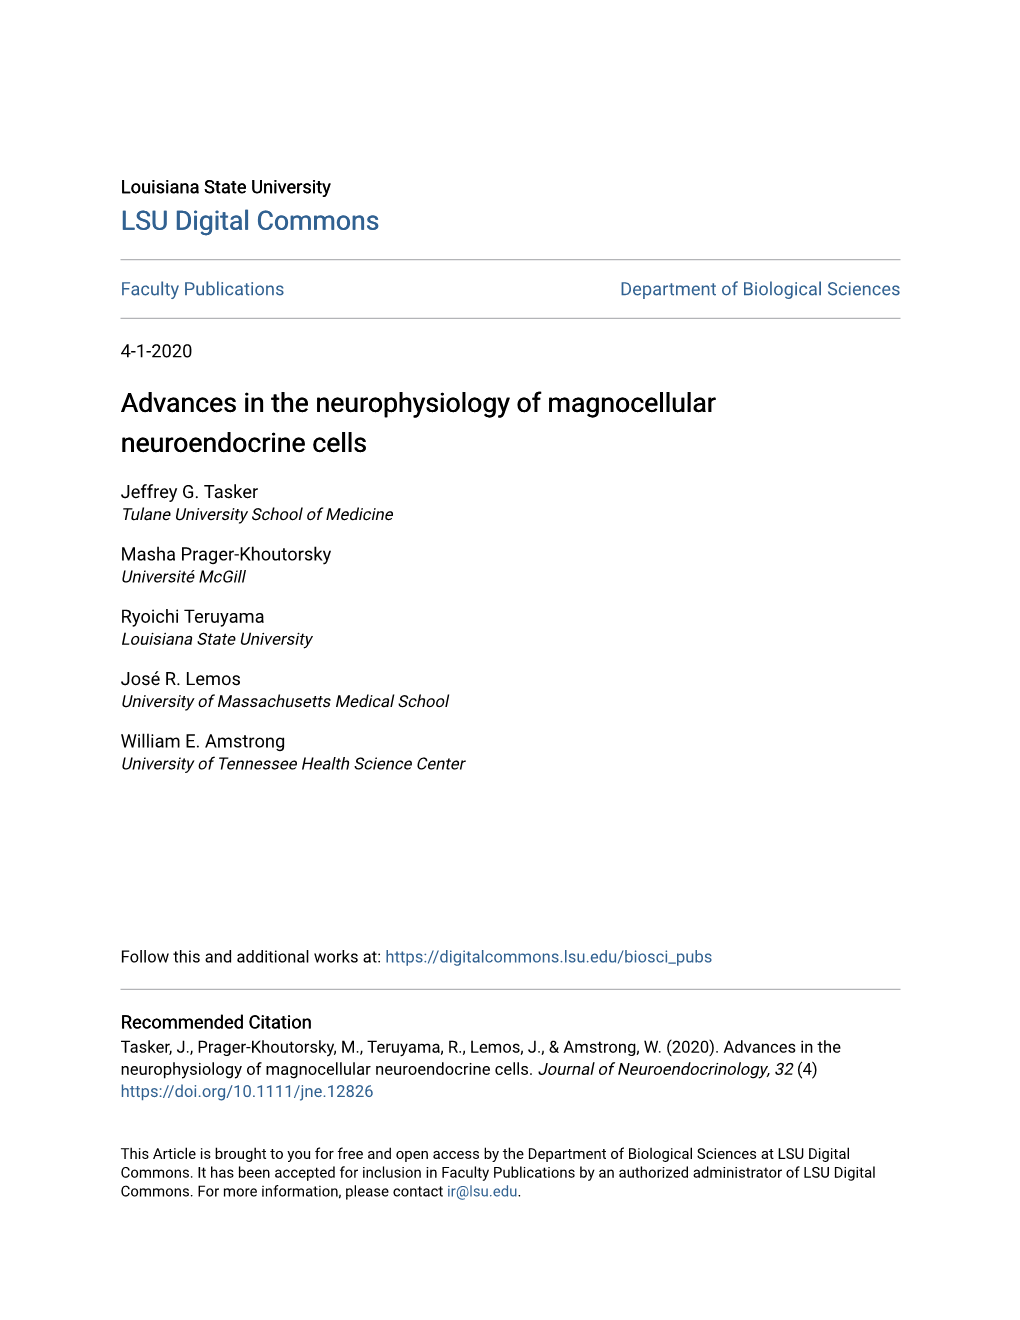 Advances in the Neurophysiology of Magnocellular Neuroendocrine Cells